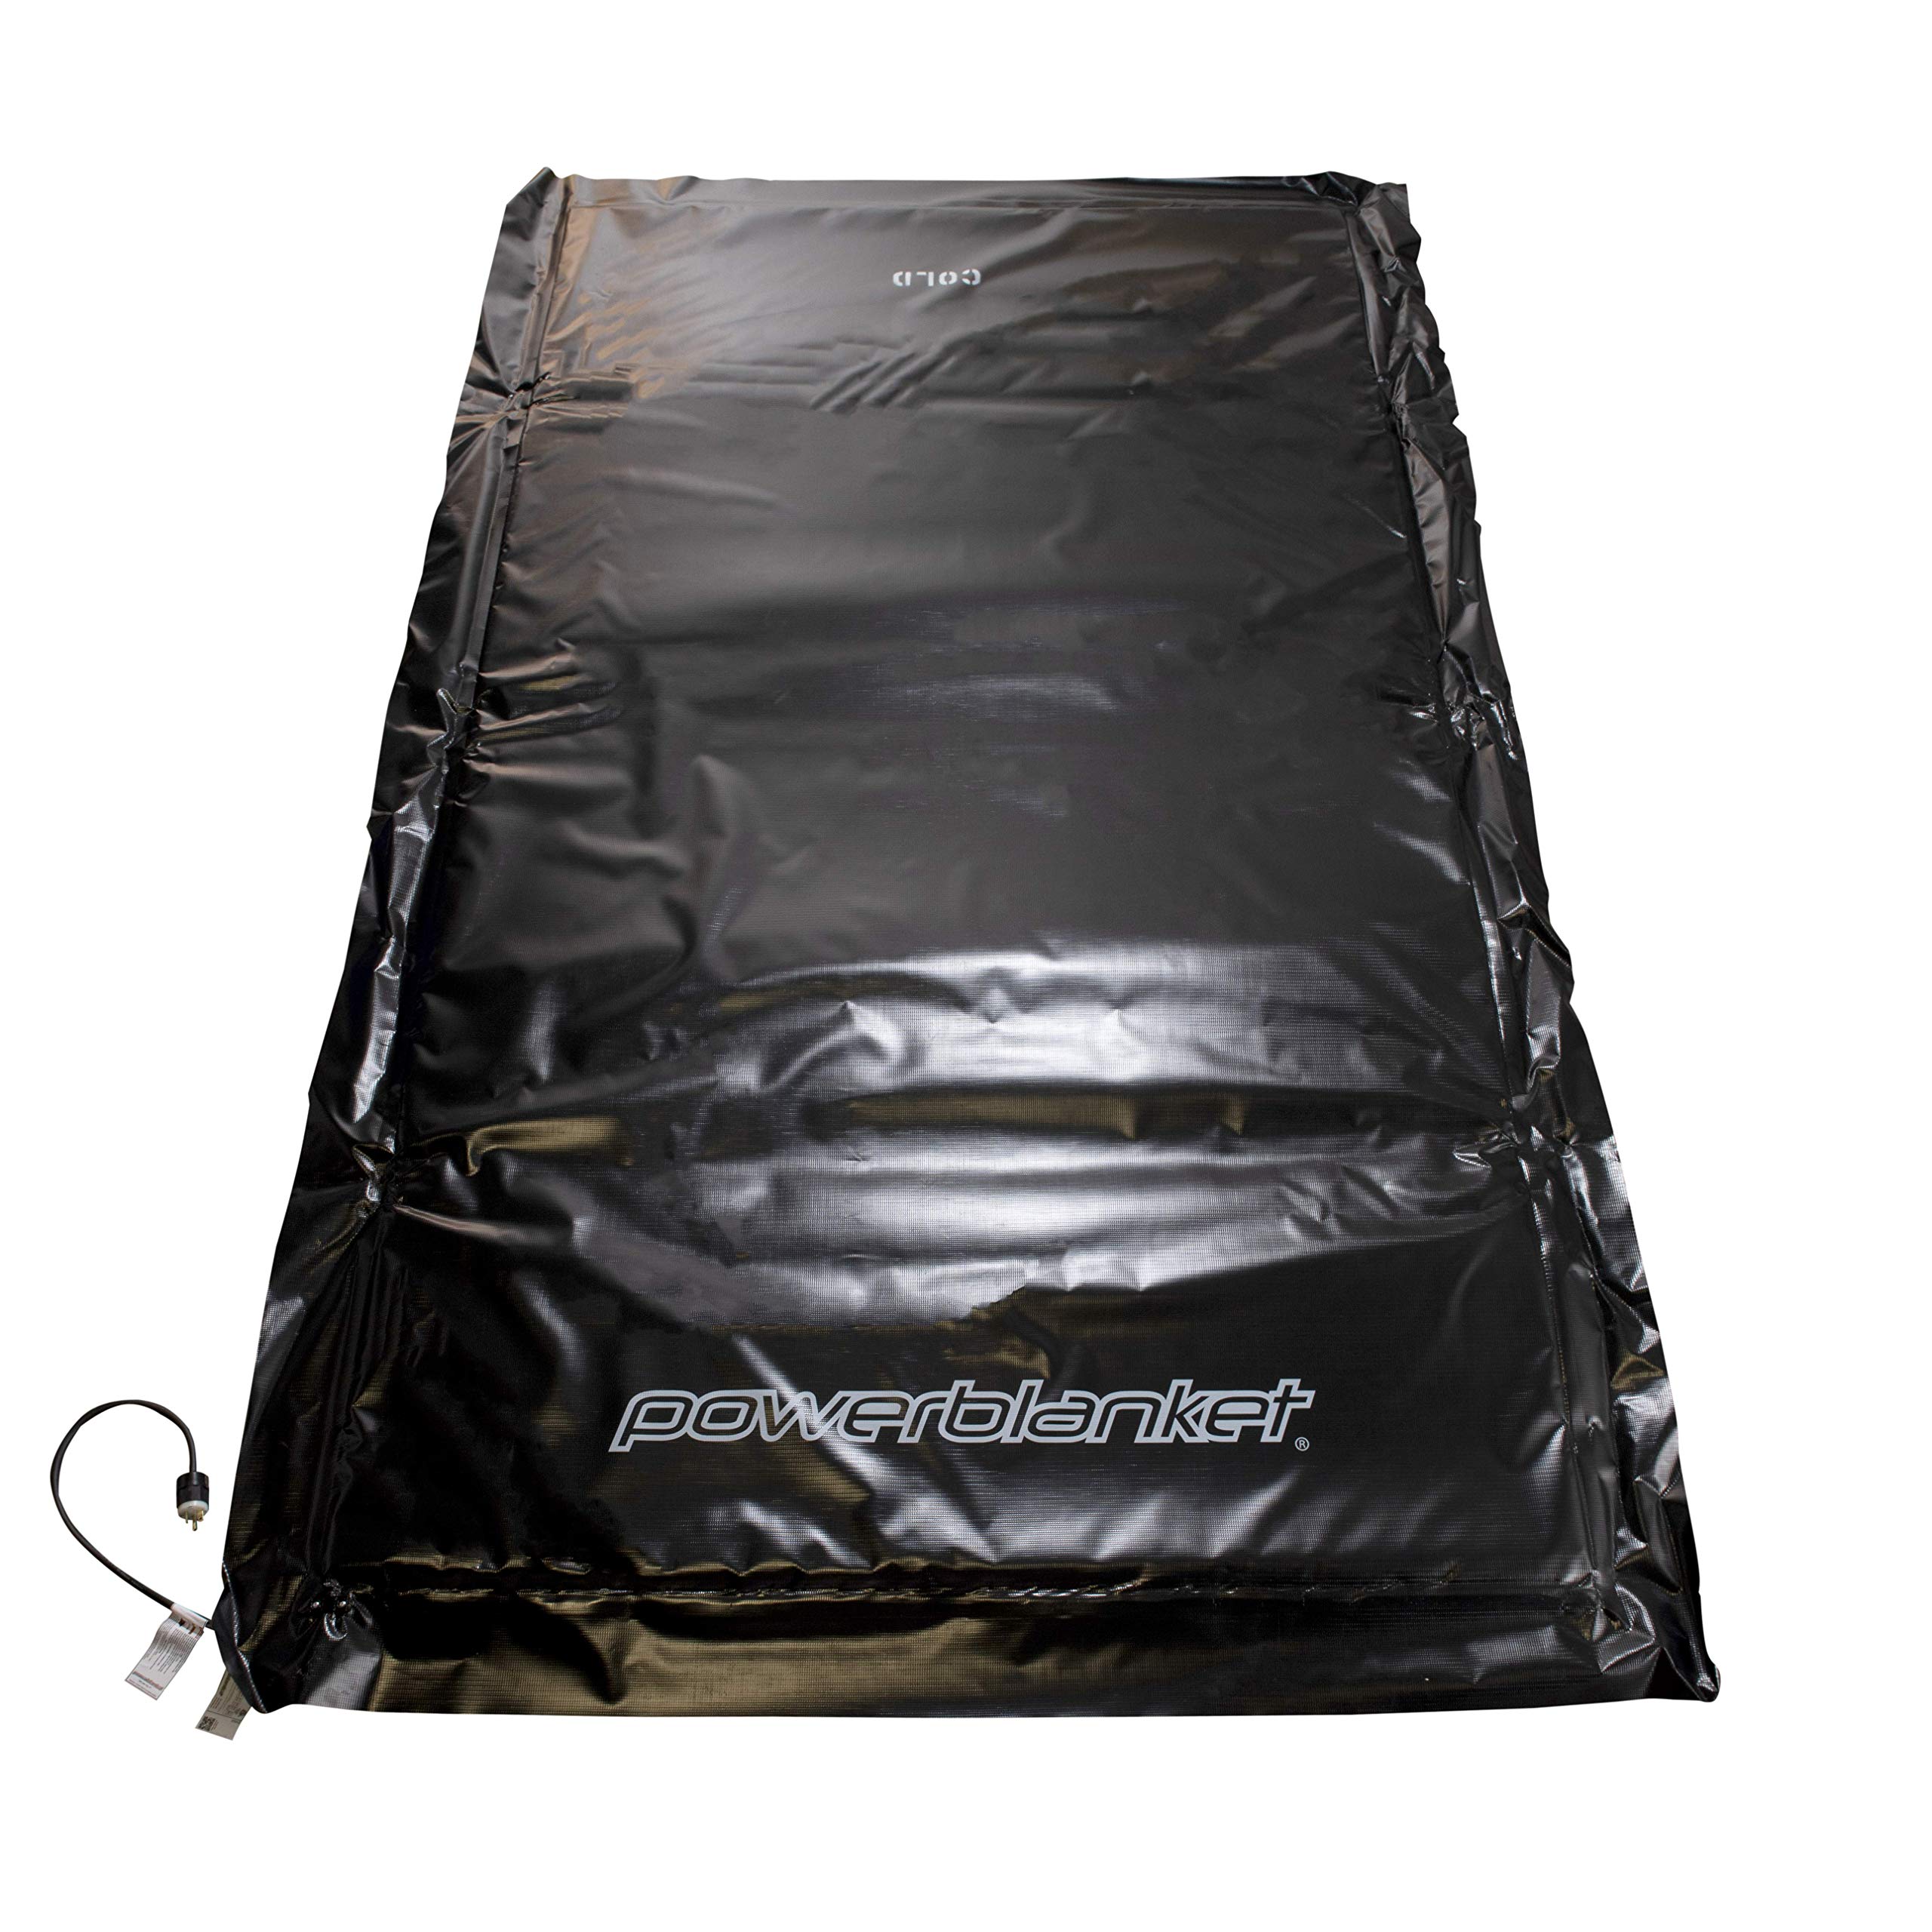 Powerblanket EH0304 Ground Thawing Blanket - 3' x 4' Heated Dimensions - 4' x 5' Finished Dimensions